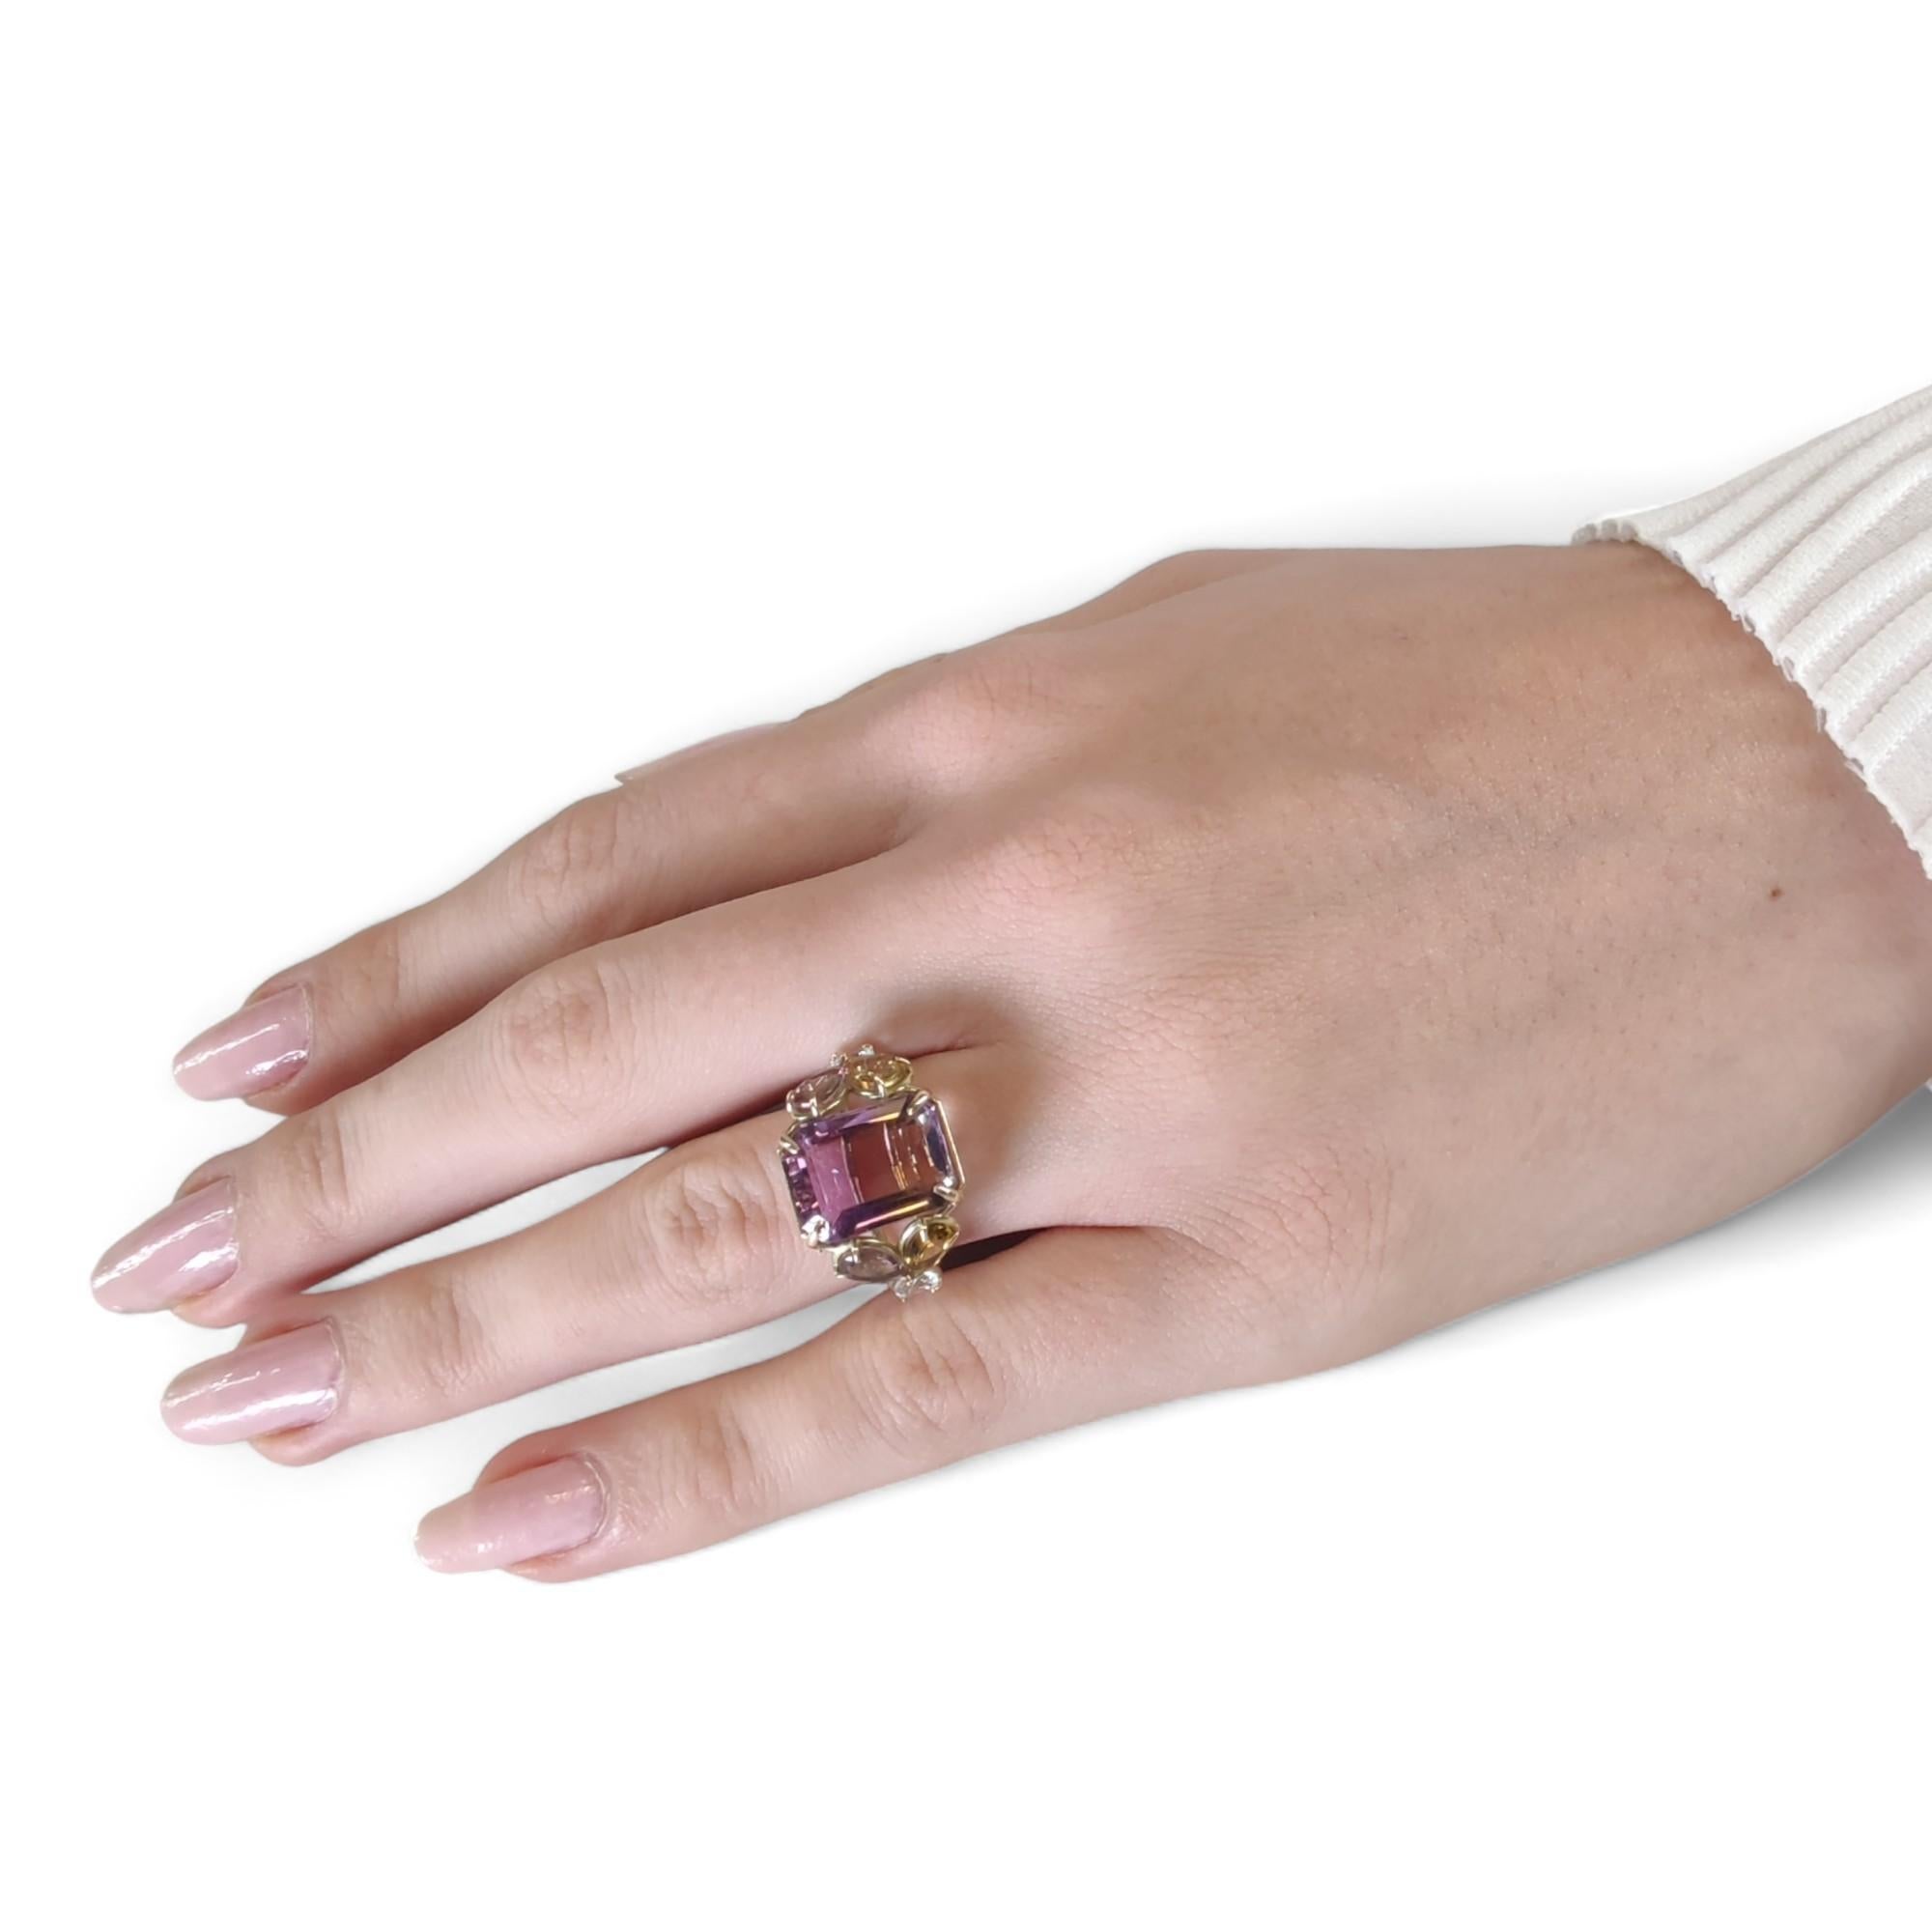 The 14K Gold Ring adorned with Ametrine and Tourmaline is a spectacular example of sculptural elegance, meticulously handcrafted for those with an appreciation for unique, contemporary design and the allure of mixed gemstones.

Technical